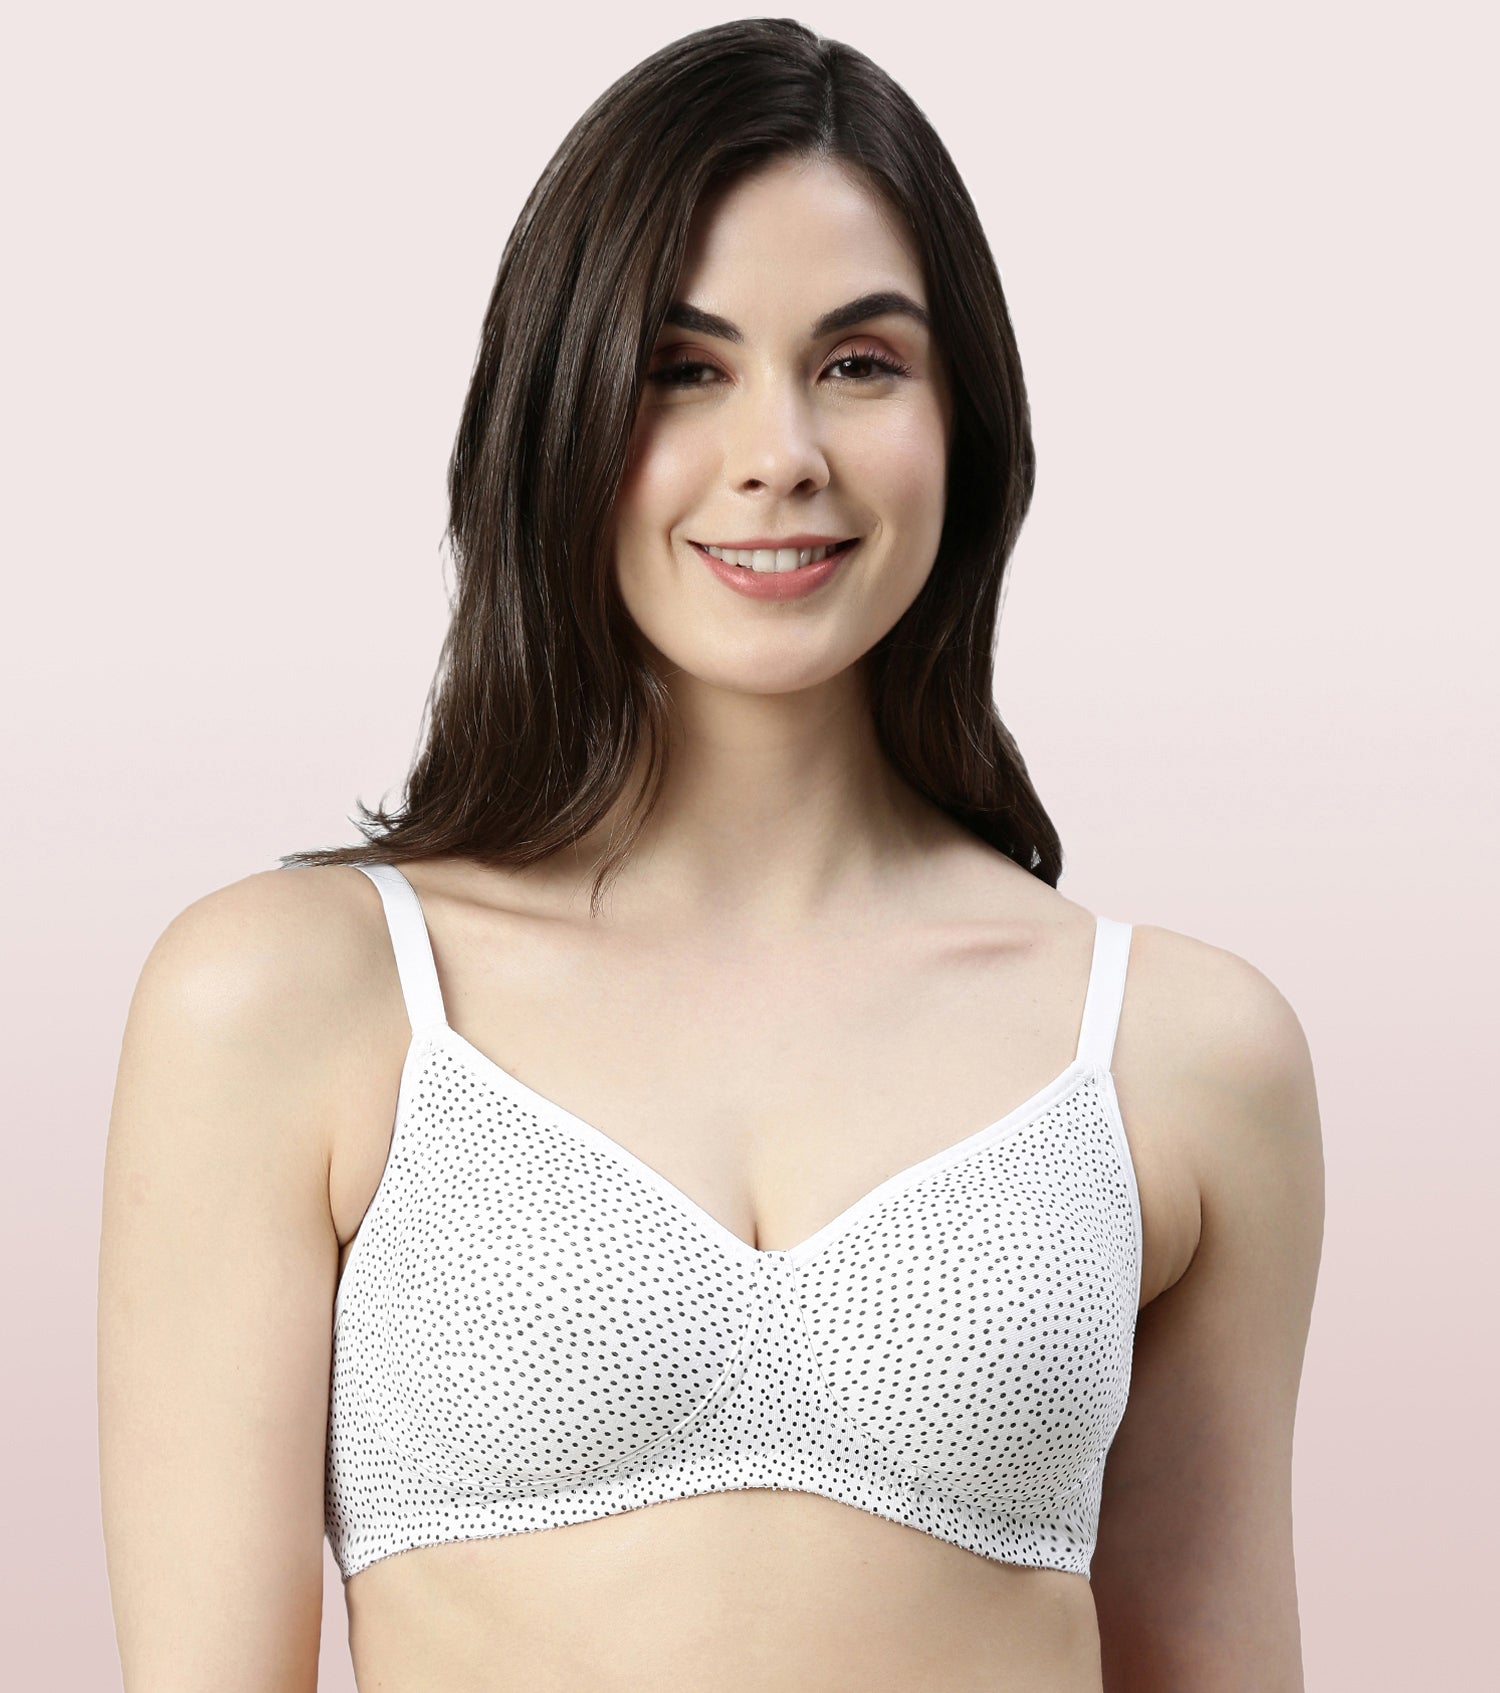 Enamor A042 Side Support Shaper Supima Cotton Everyday Bra - Non-Padded,  Wirefree & High Coverage White